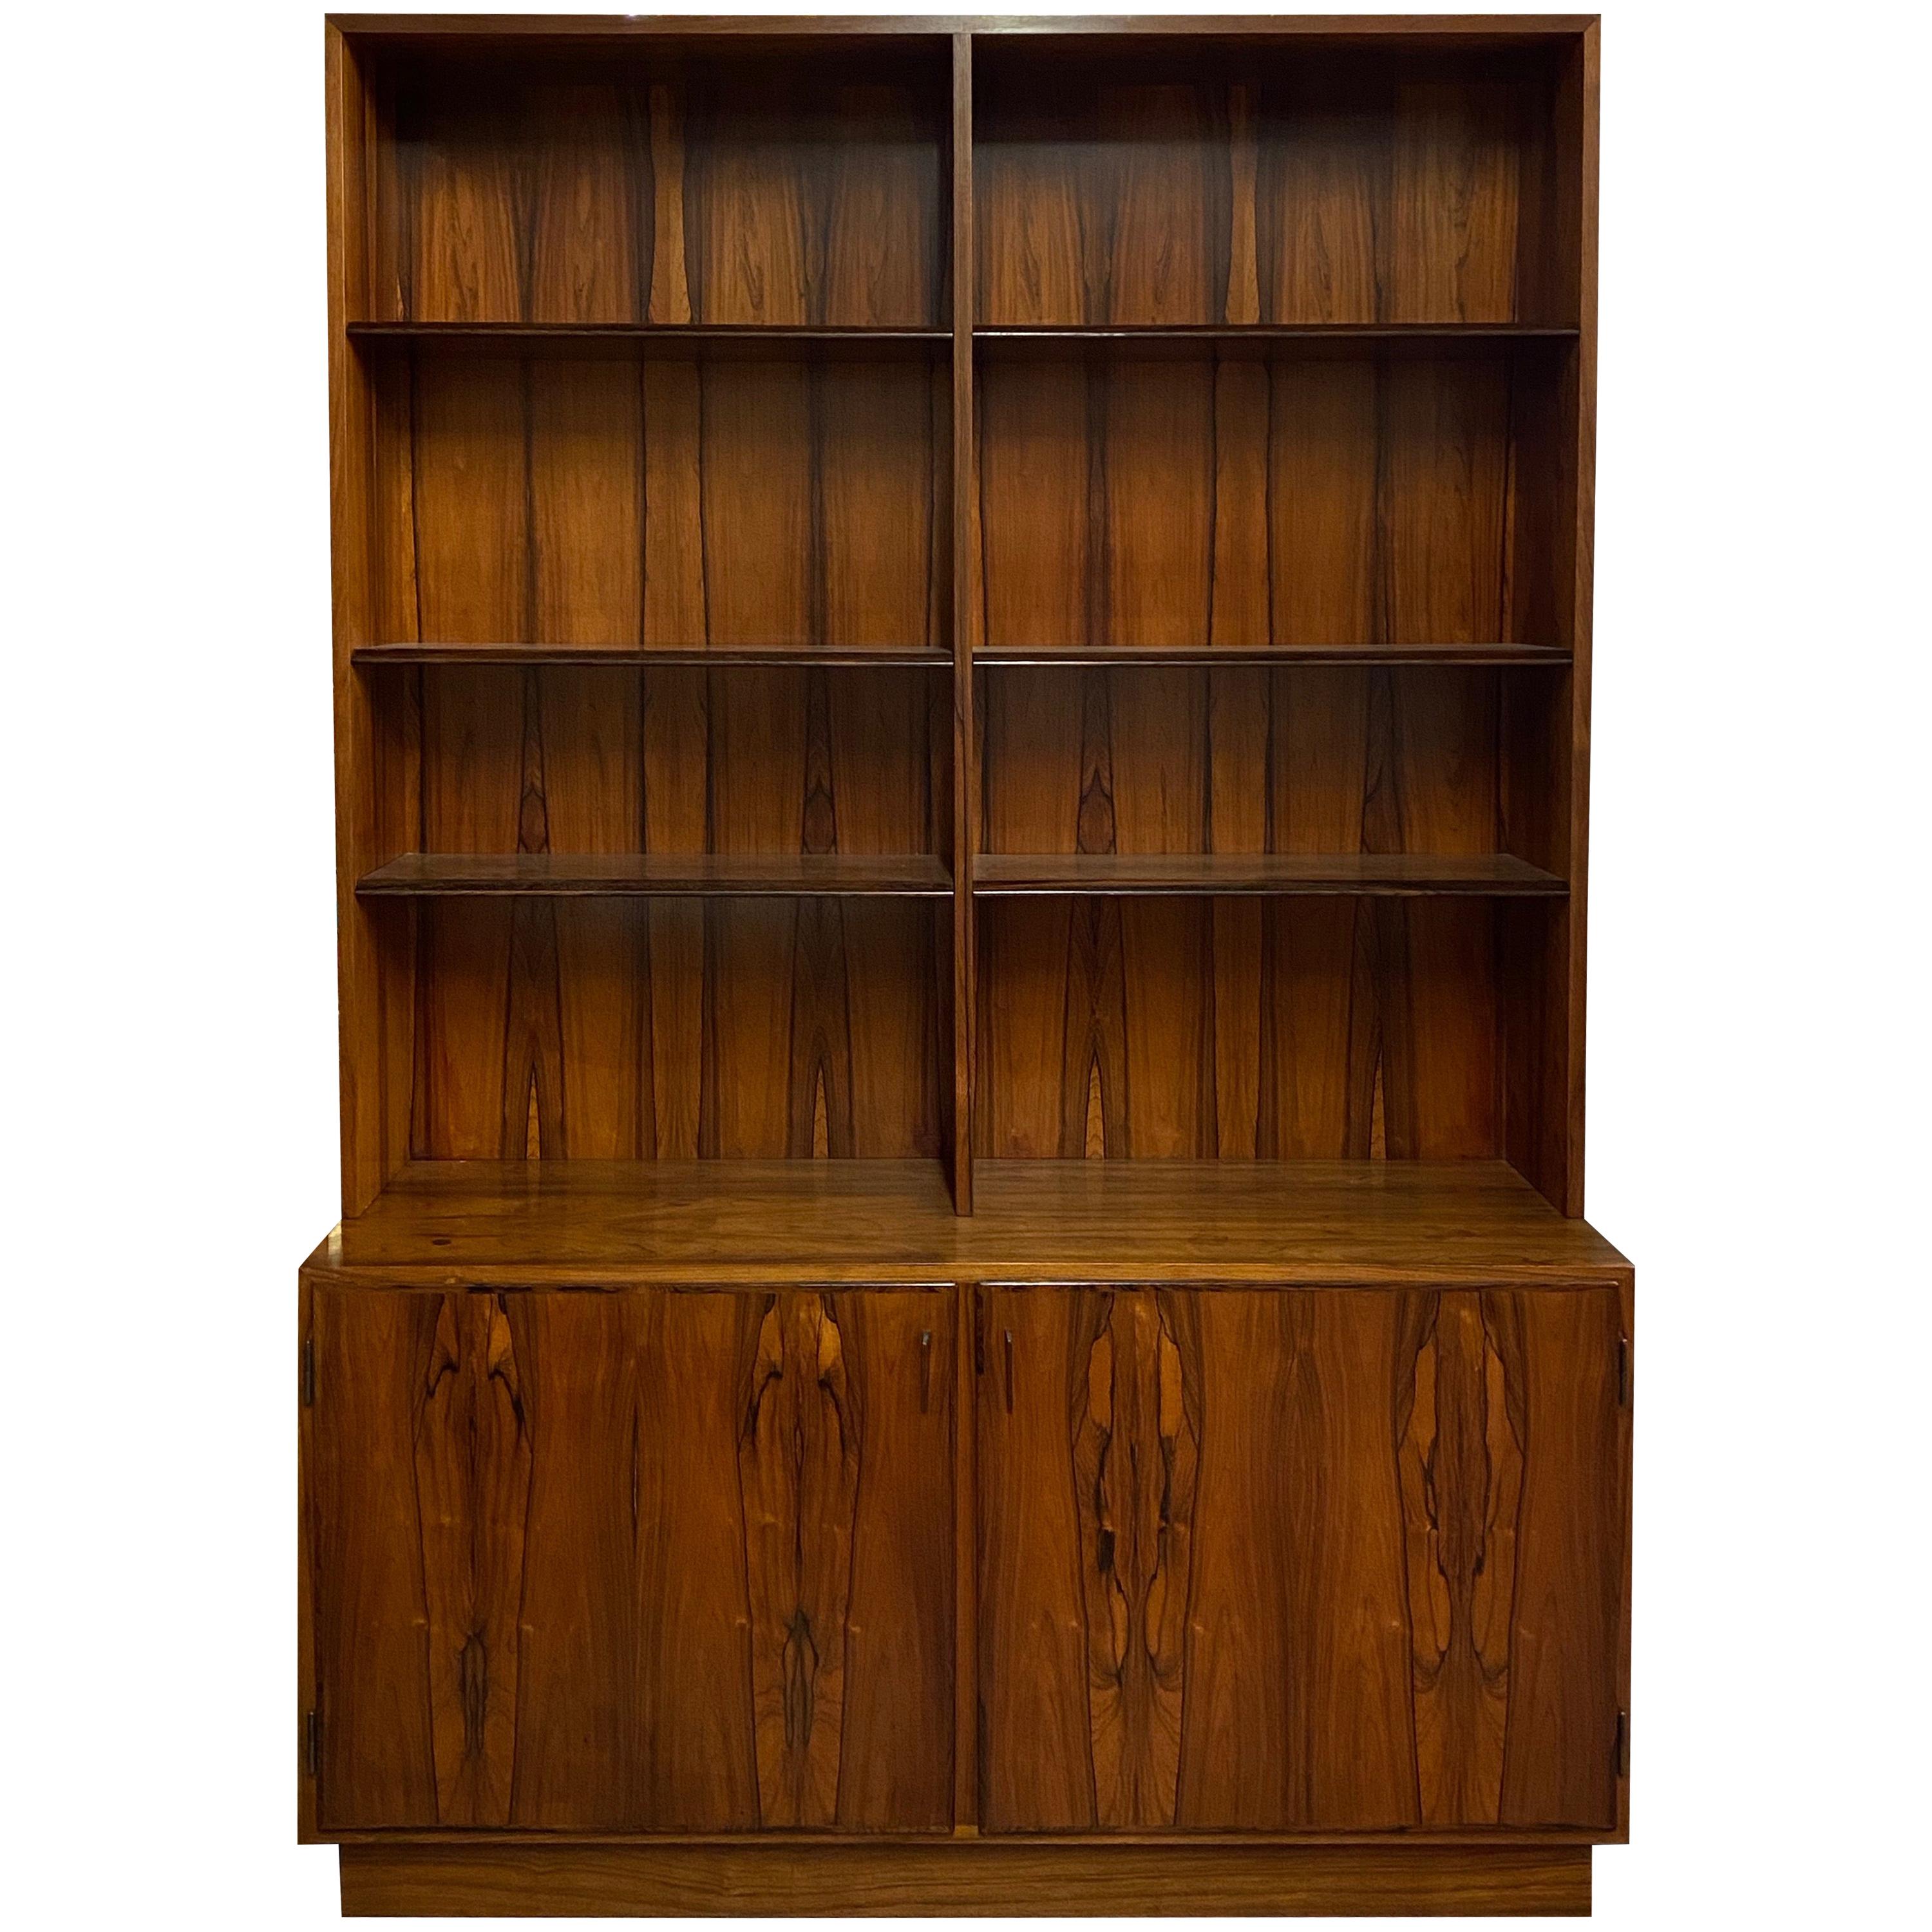 Danish Modern Rosewood Bookcase / Cabinet by Poul Hundevad, circa 1960s